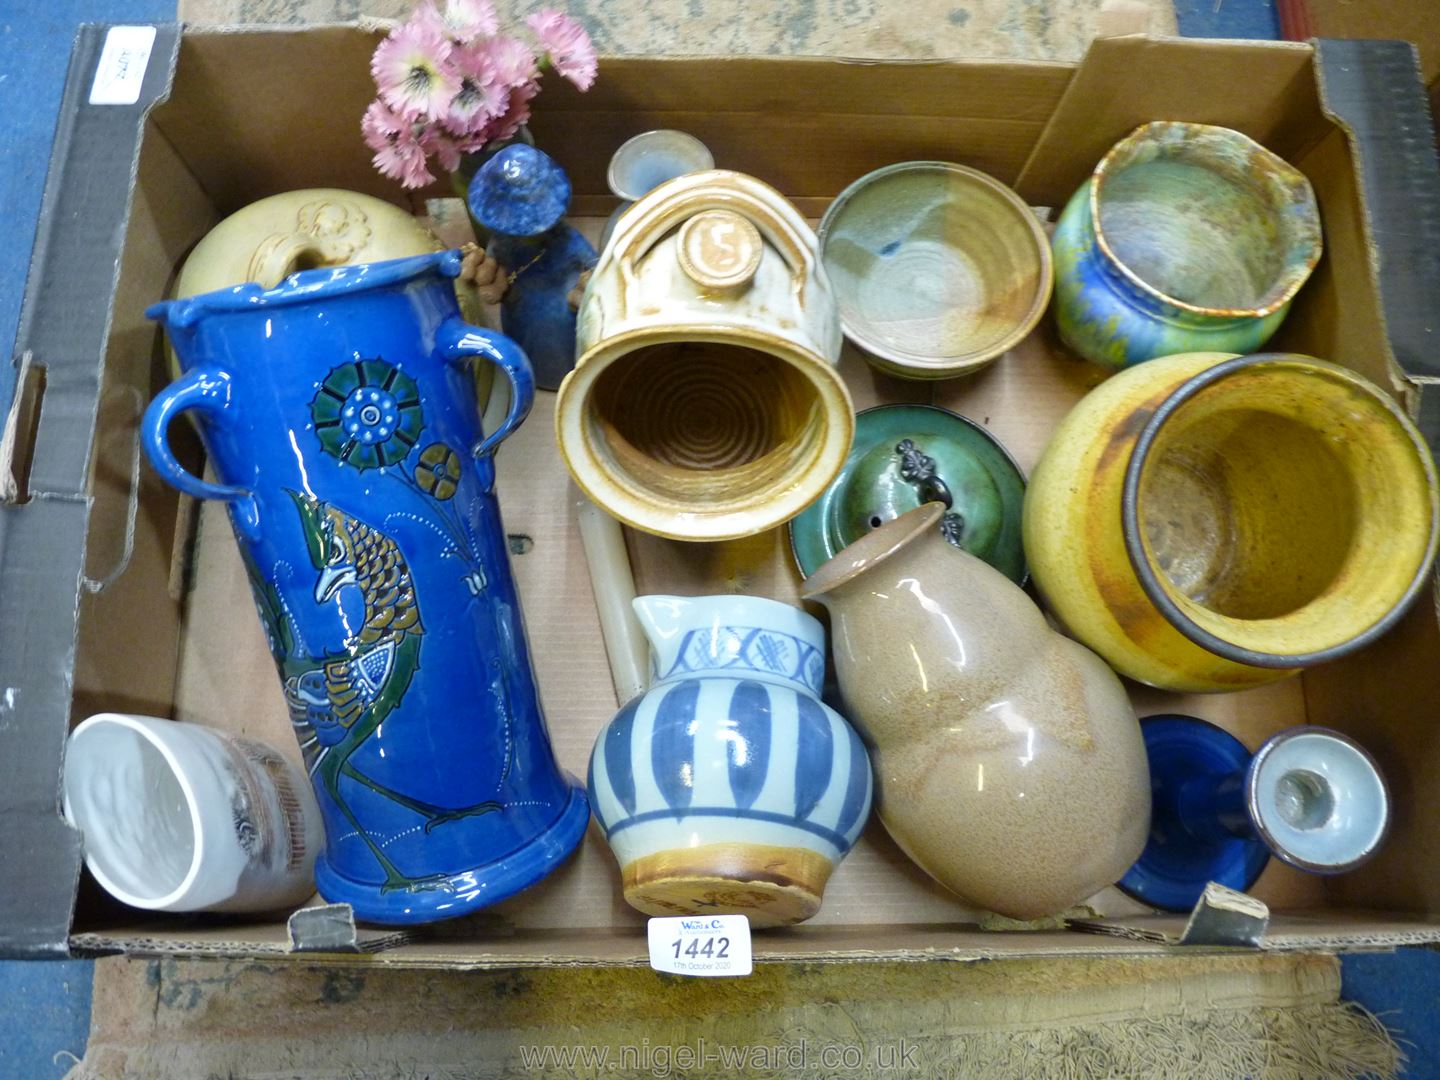 A quantity of Studio Pottery including salt pig, cheese dome, Royal Barum ware three handled vase,